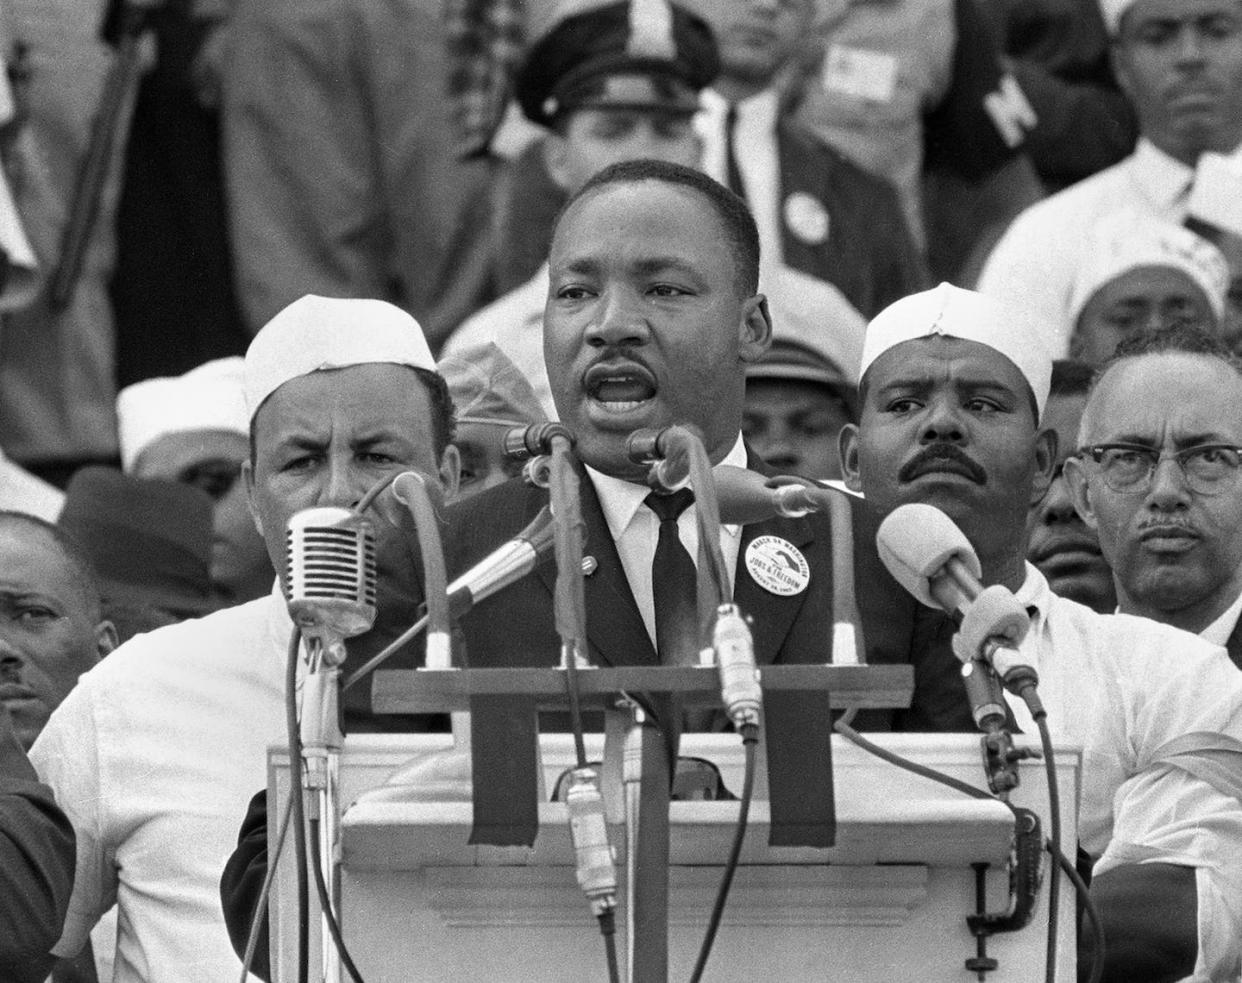 Dr. Martin Luther King Jr. addresses marchers during his 'I Have a Dream' speech at the Lincoln Memorial in Washington. AP Photo